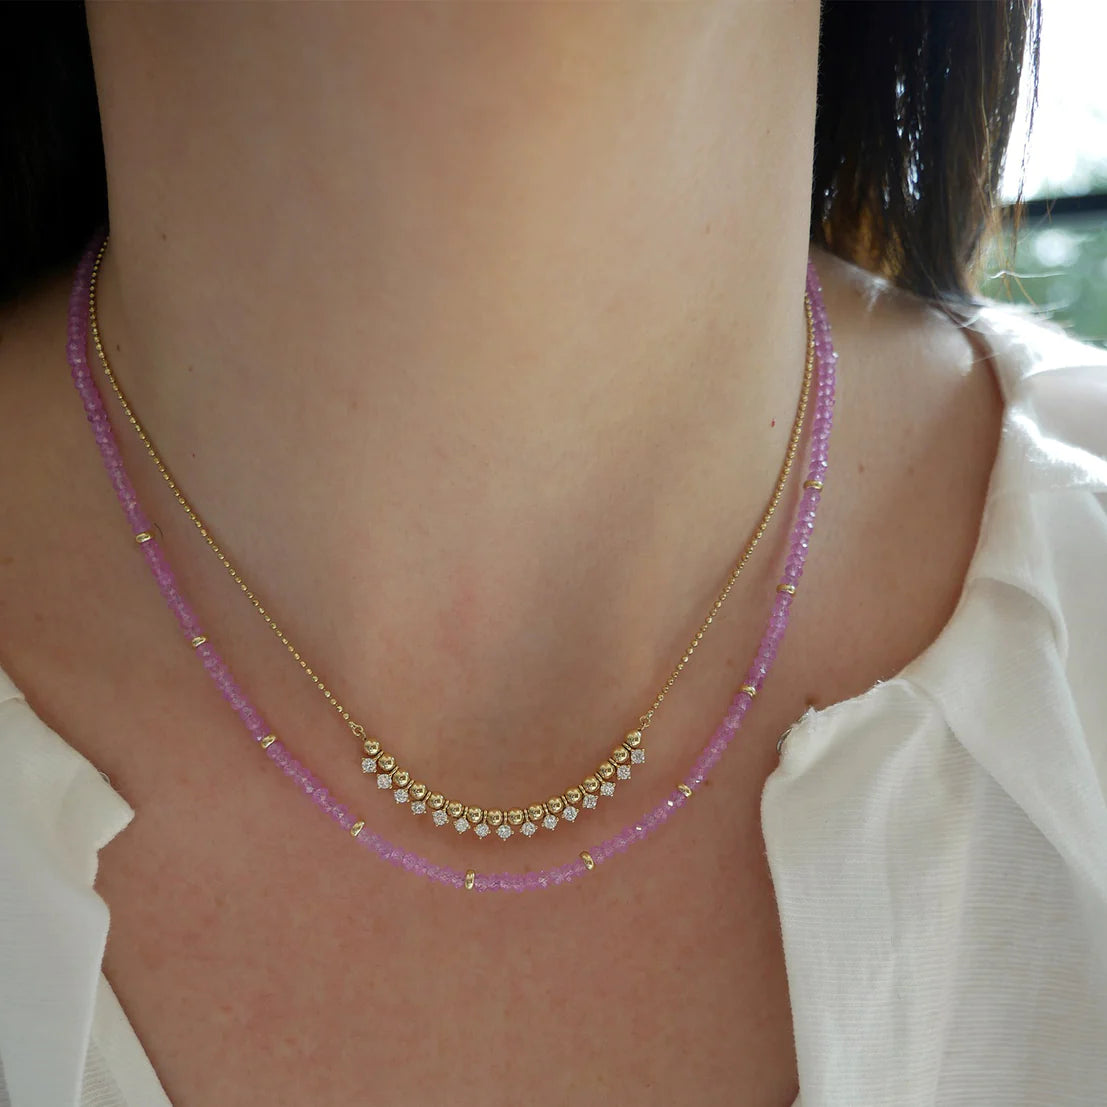 EF Collection Birthstone Bead Necklace in Pink Sapphire